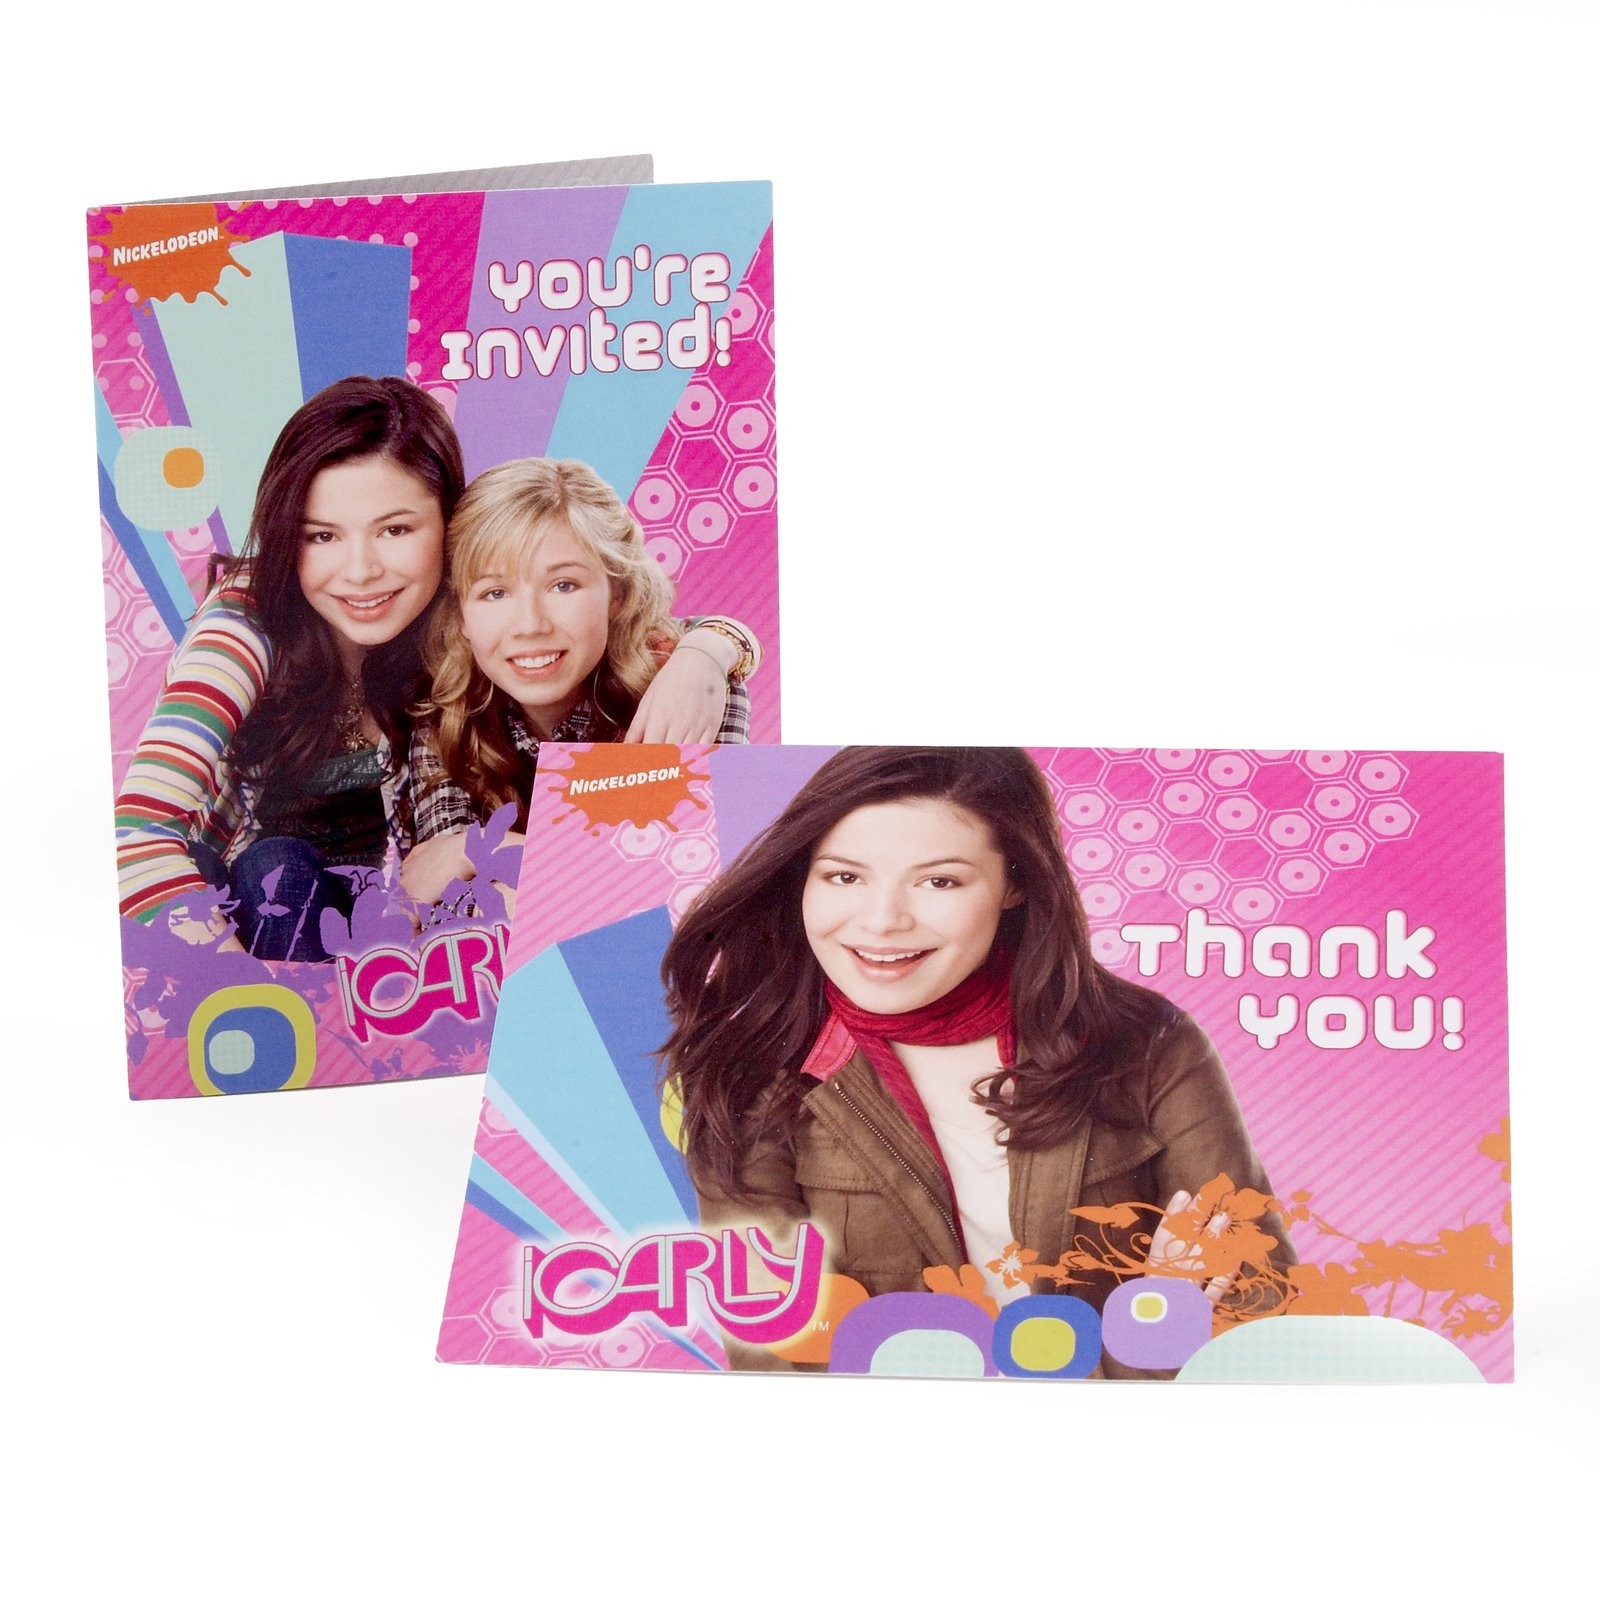 ICARLY INVITE and THANK YOU